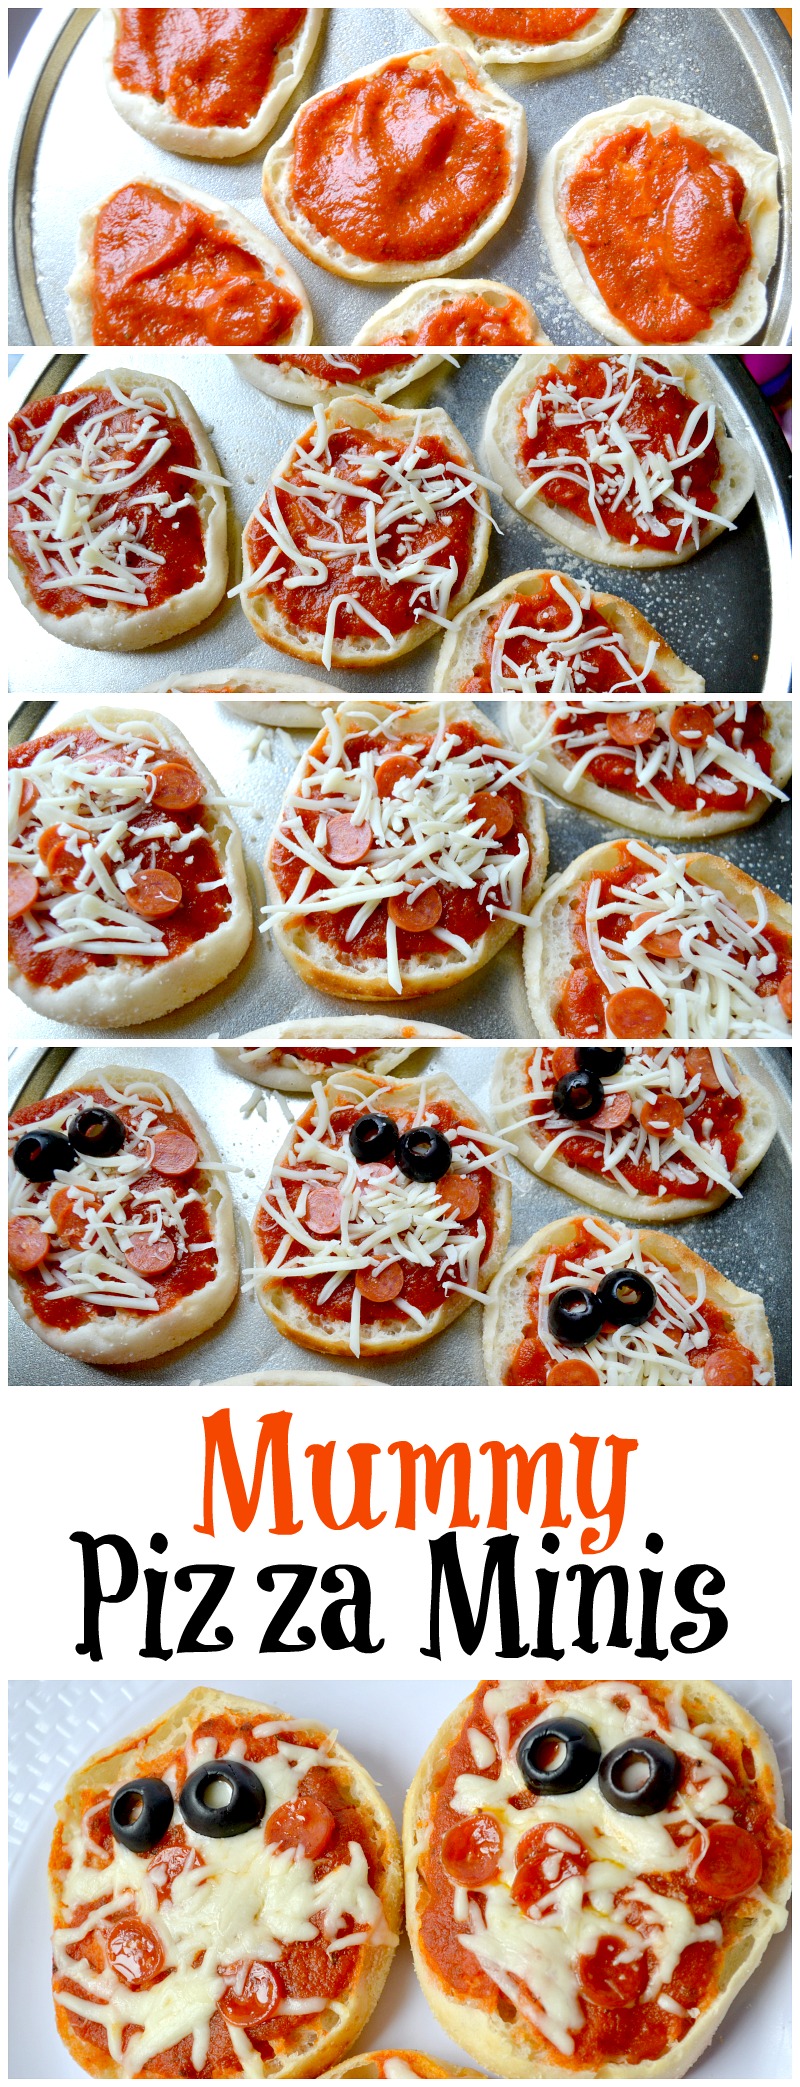 Easy Halloween Meal For Kids: Mummy Pizza Minis